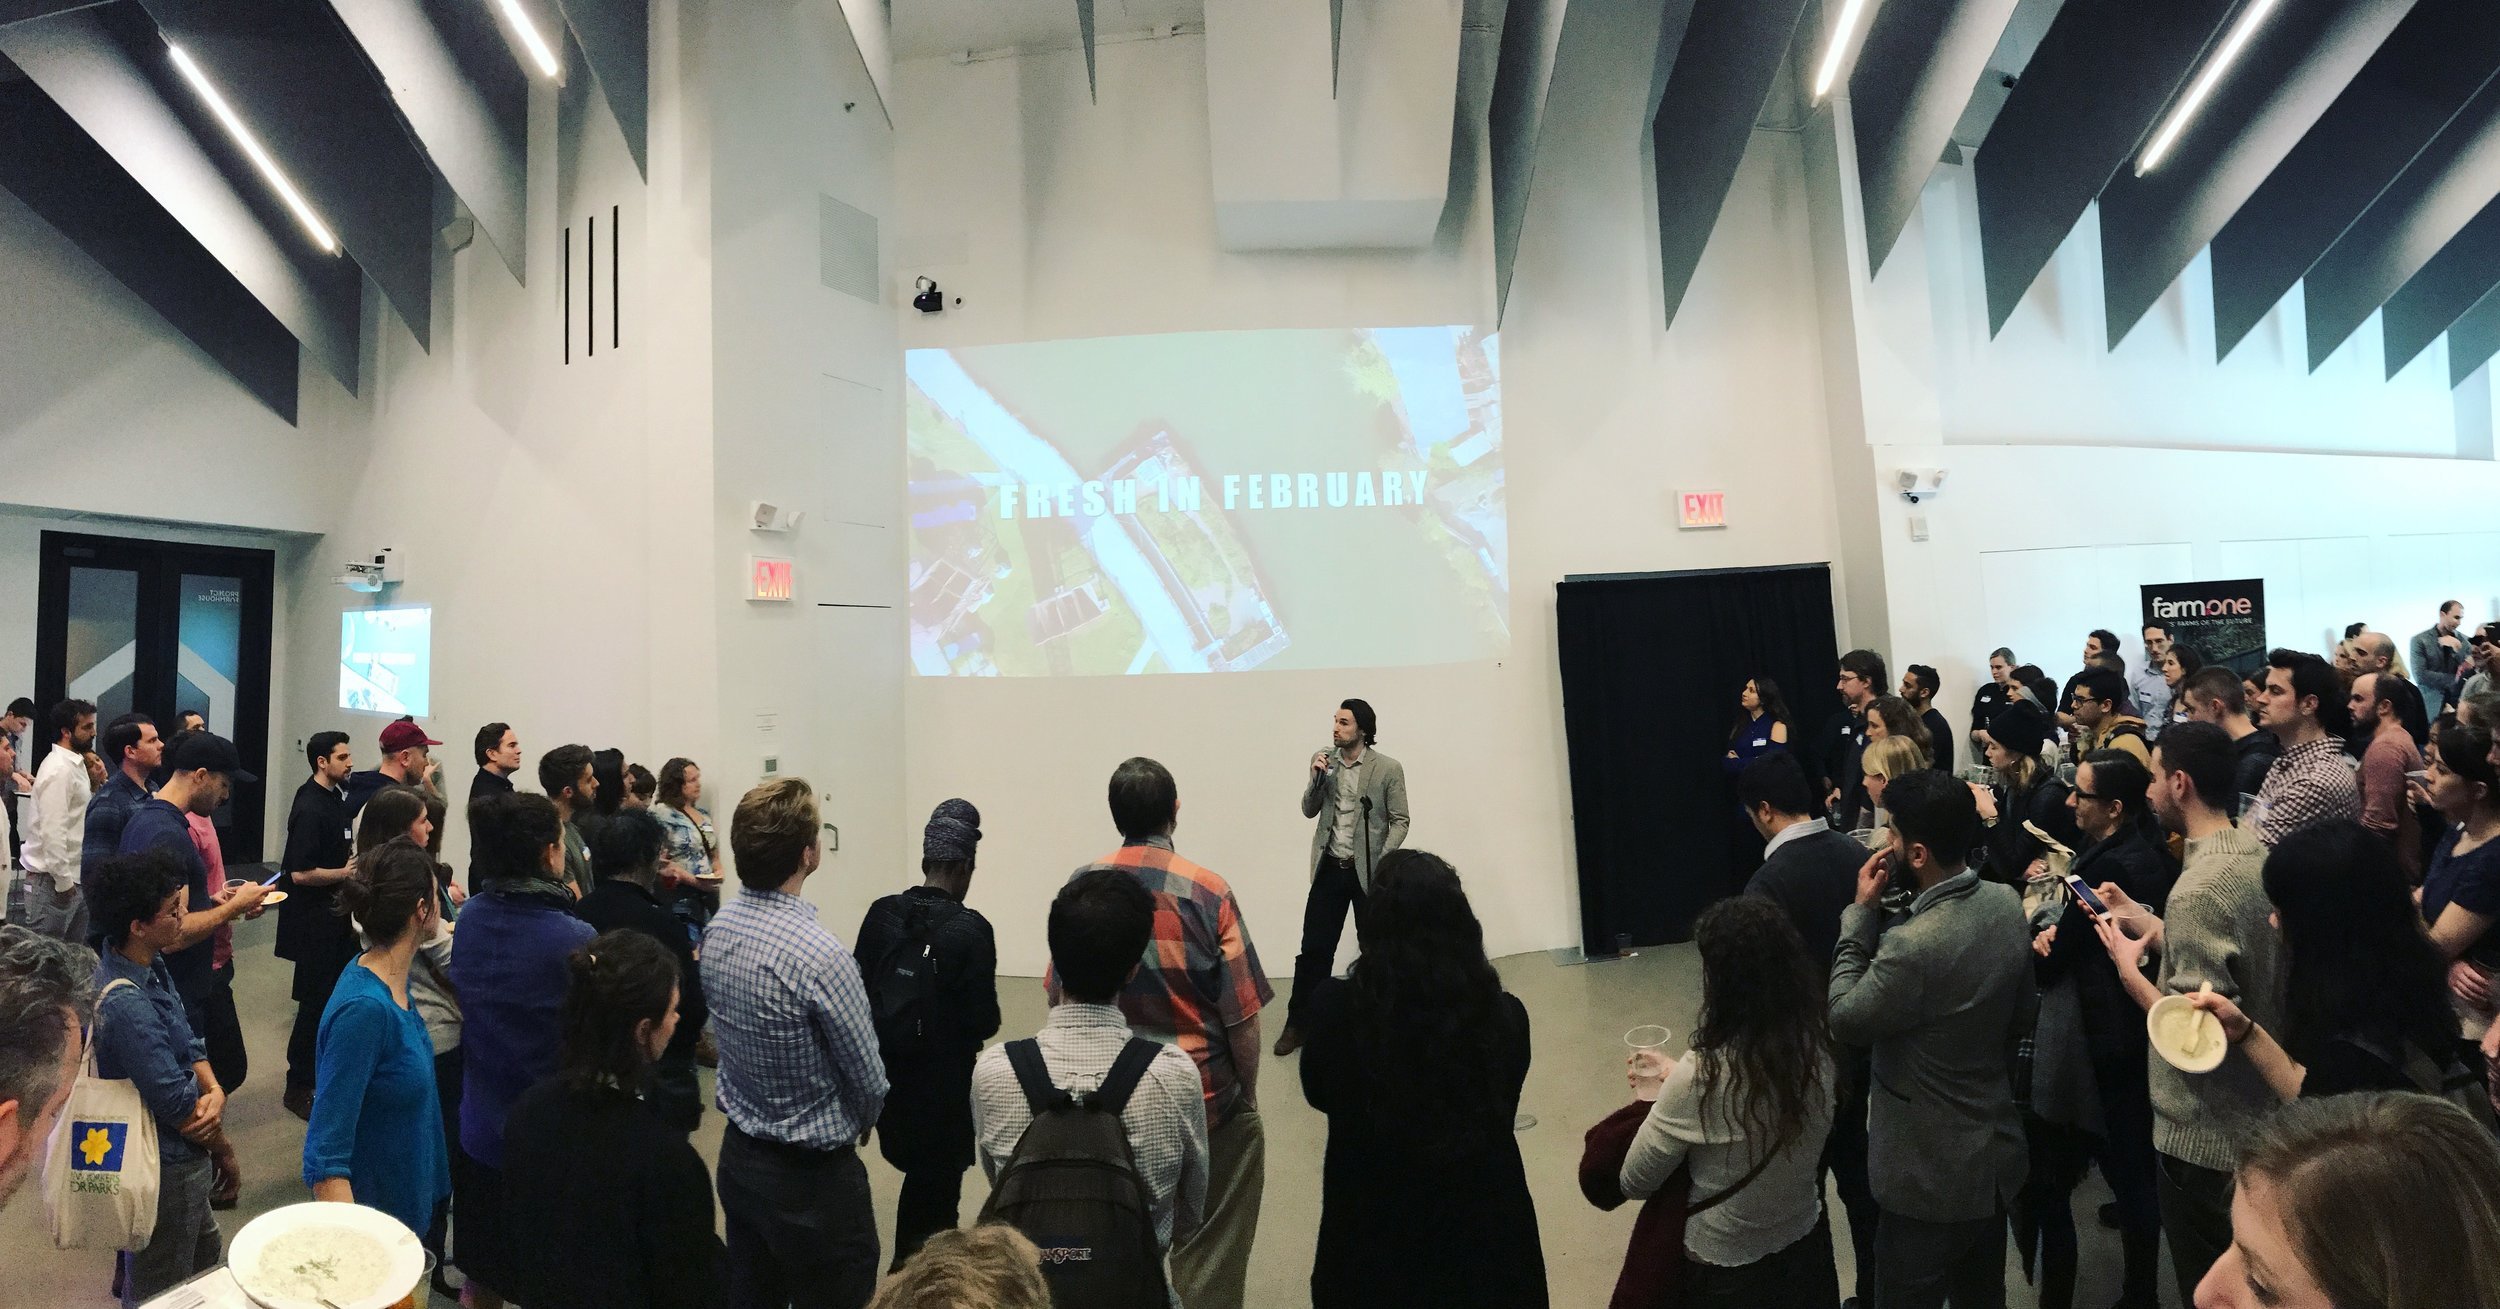 Henry Gordon-Smith addresses the audience at Fresh in February, 2018, a unique annual event by the NYC Agriculture Collective. Fresh in February 2019 will be on Feb 28th by Union Square - tickets are on sale now.